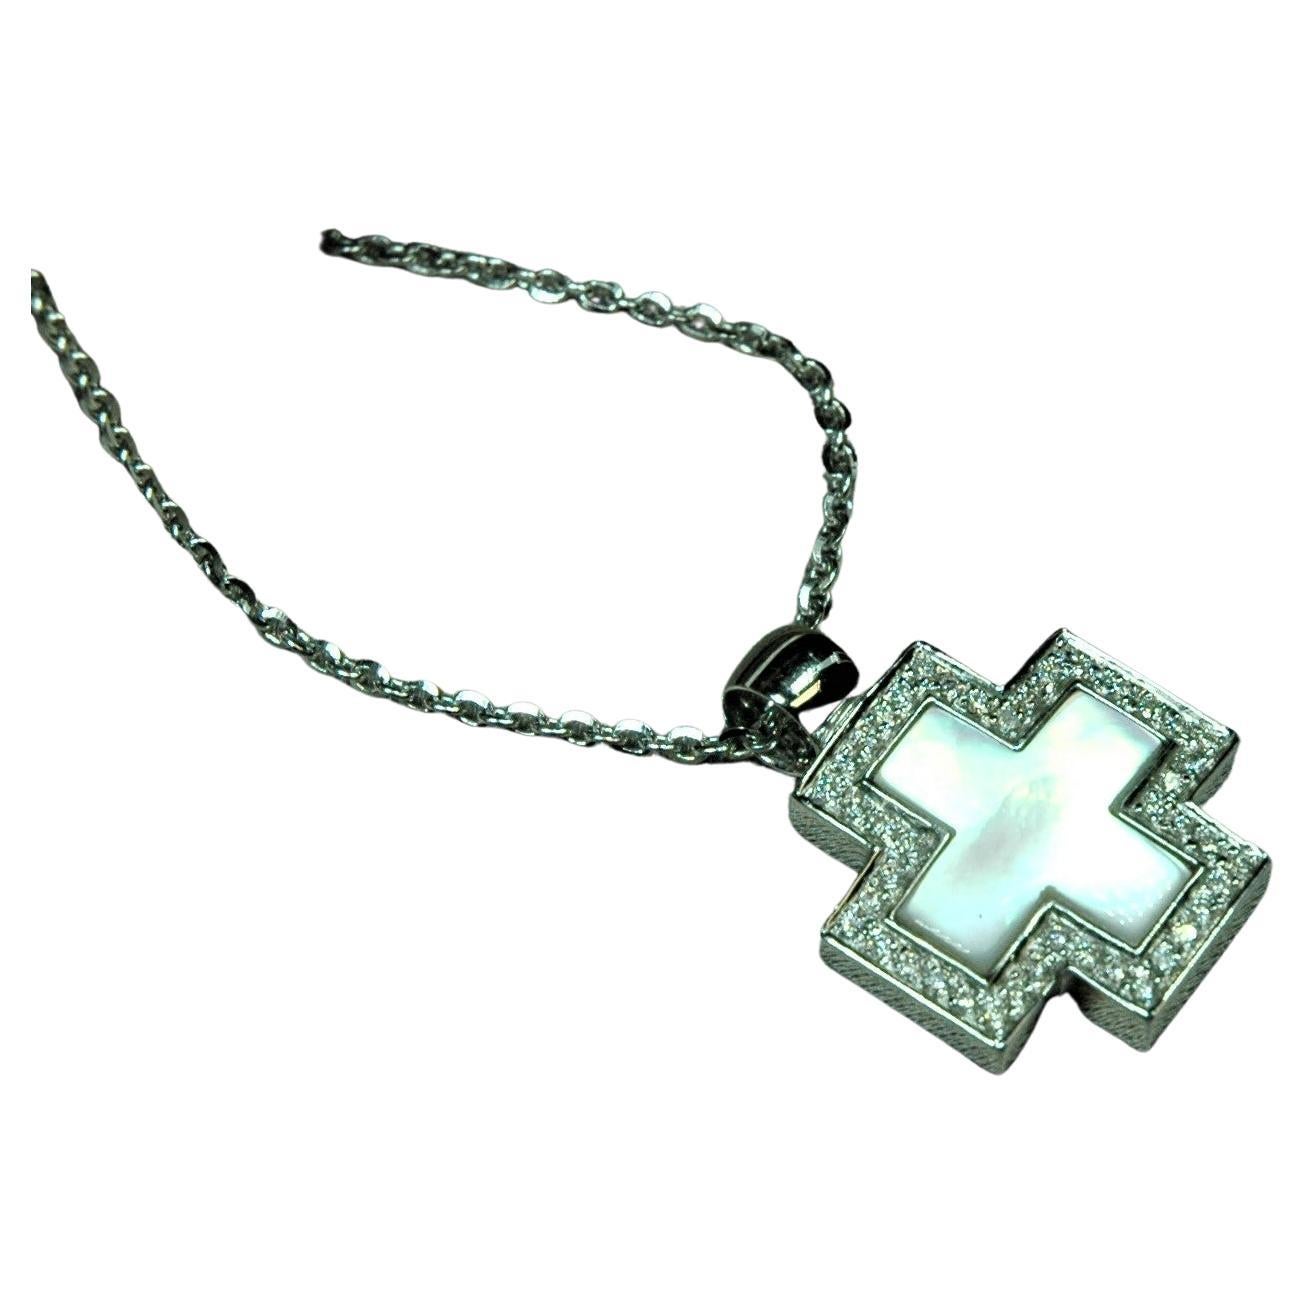 Square-shaped cross in white gold 18 kt., embellished in the center by a cross in white mother-of-pearl and surrounded by brilliant cut diamonds (0.40 ct). The chain is a diamond groumette. The counter-link of the pendant is fixed and rounded,